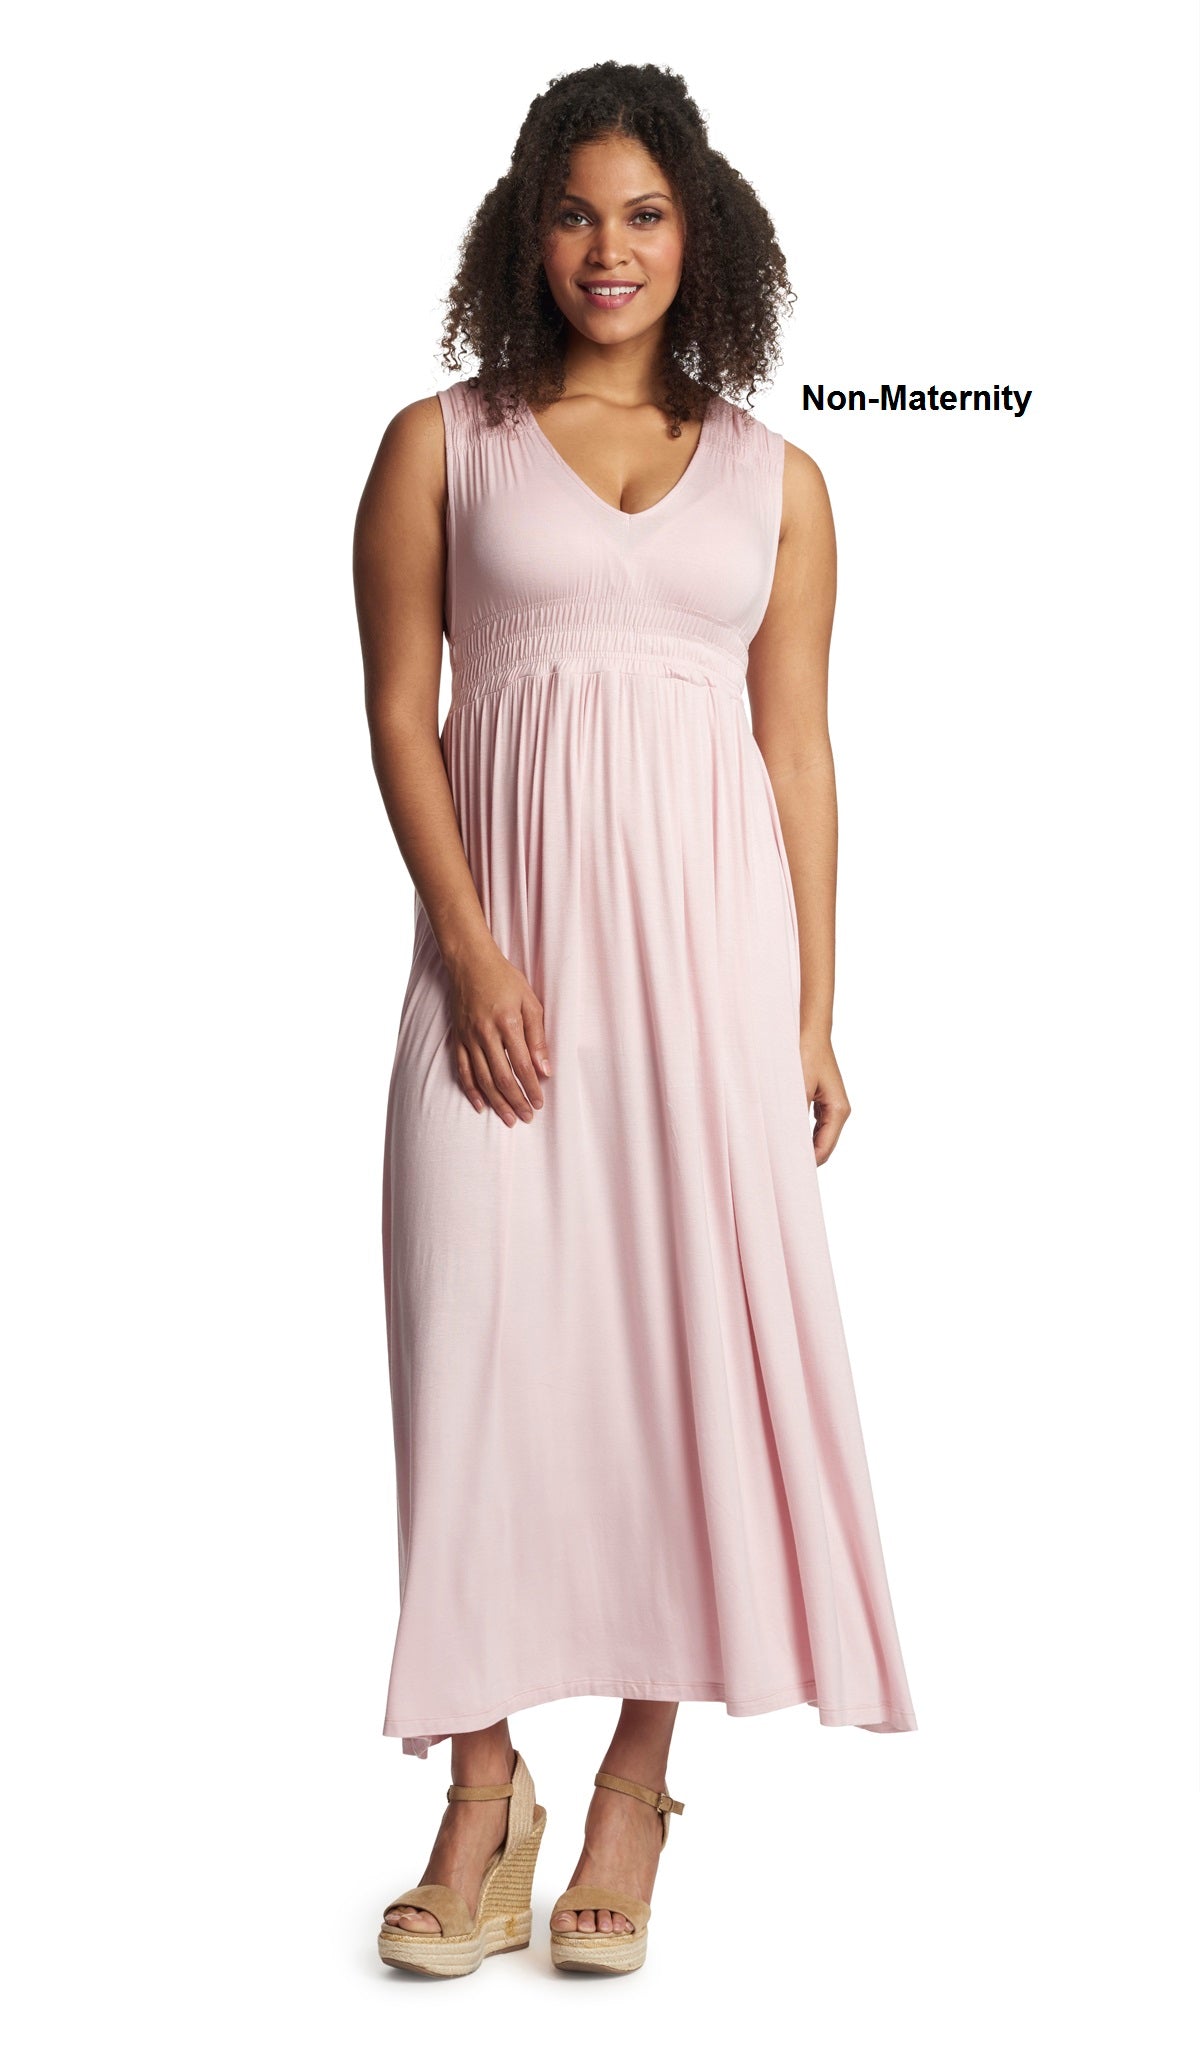 Blush Valeria dress worn as non-maternity style by woman standing with one hand resting on leg.